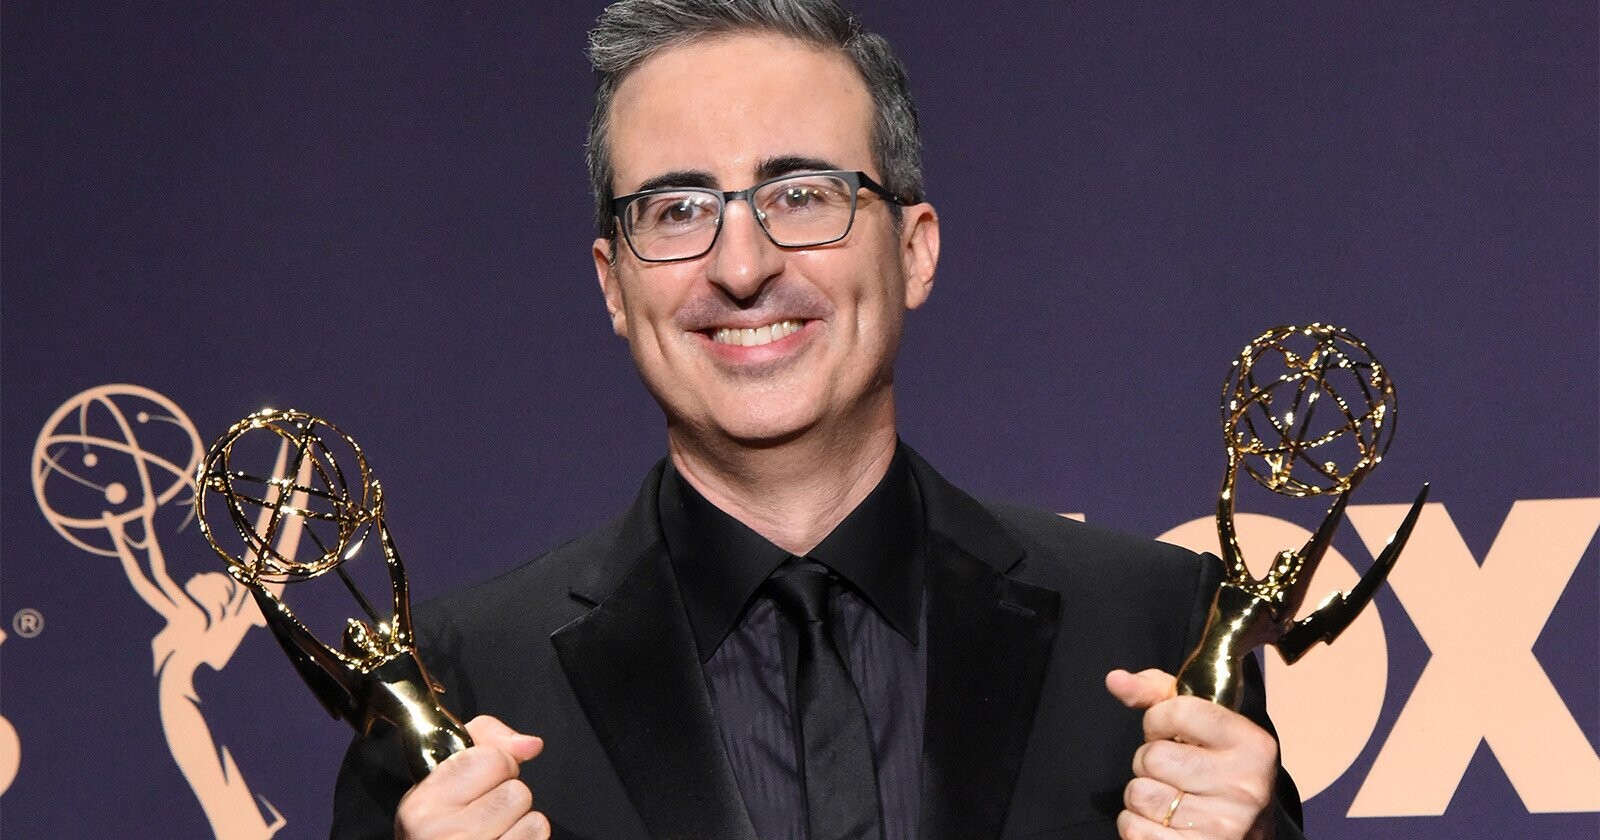 John Oliver Says He Couldn’t Host the Oscars Because He’d ‘Poison the Room’ with ‘Visible Contempt’